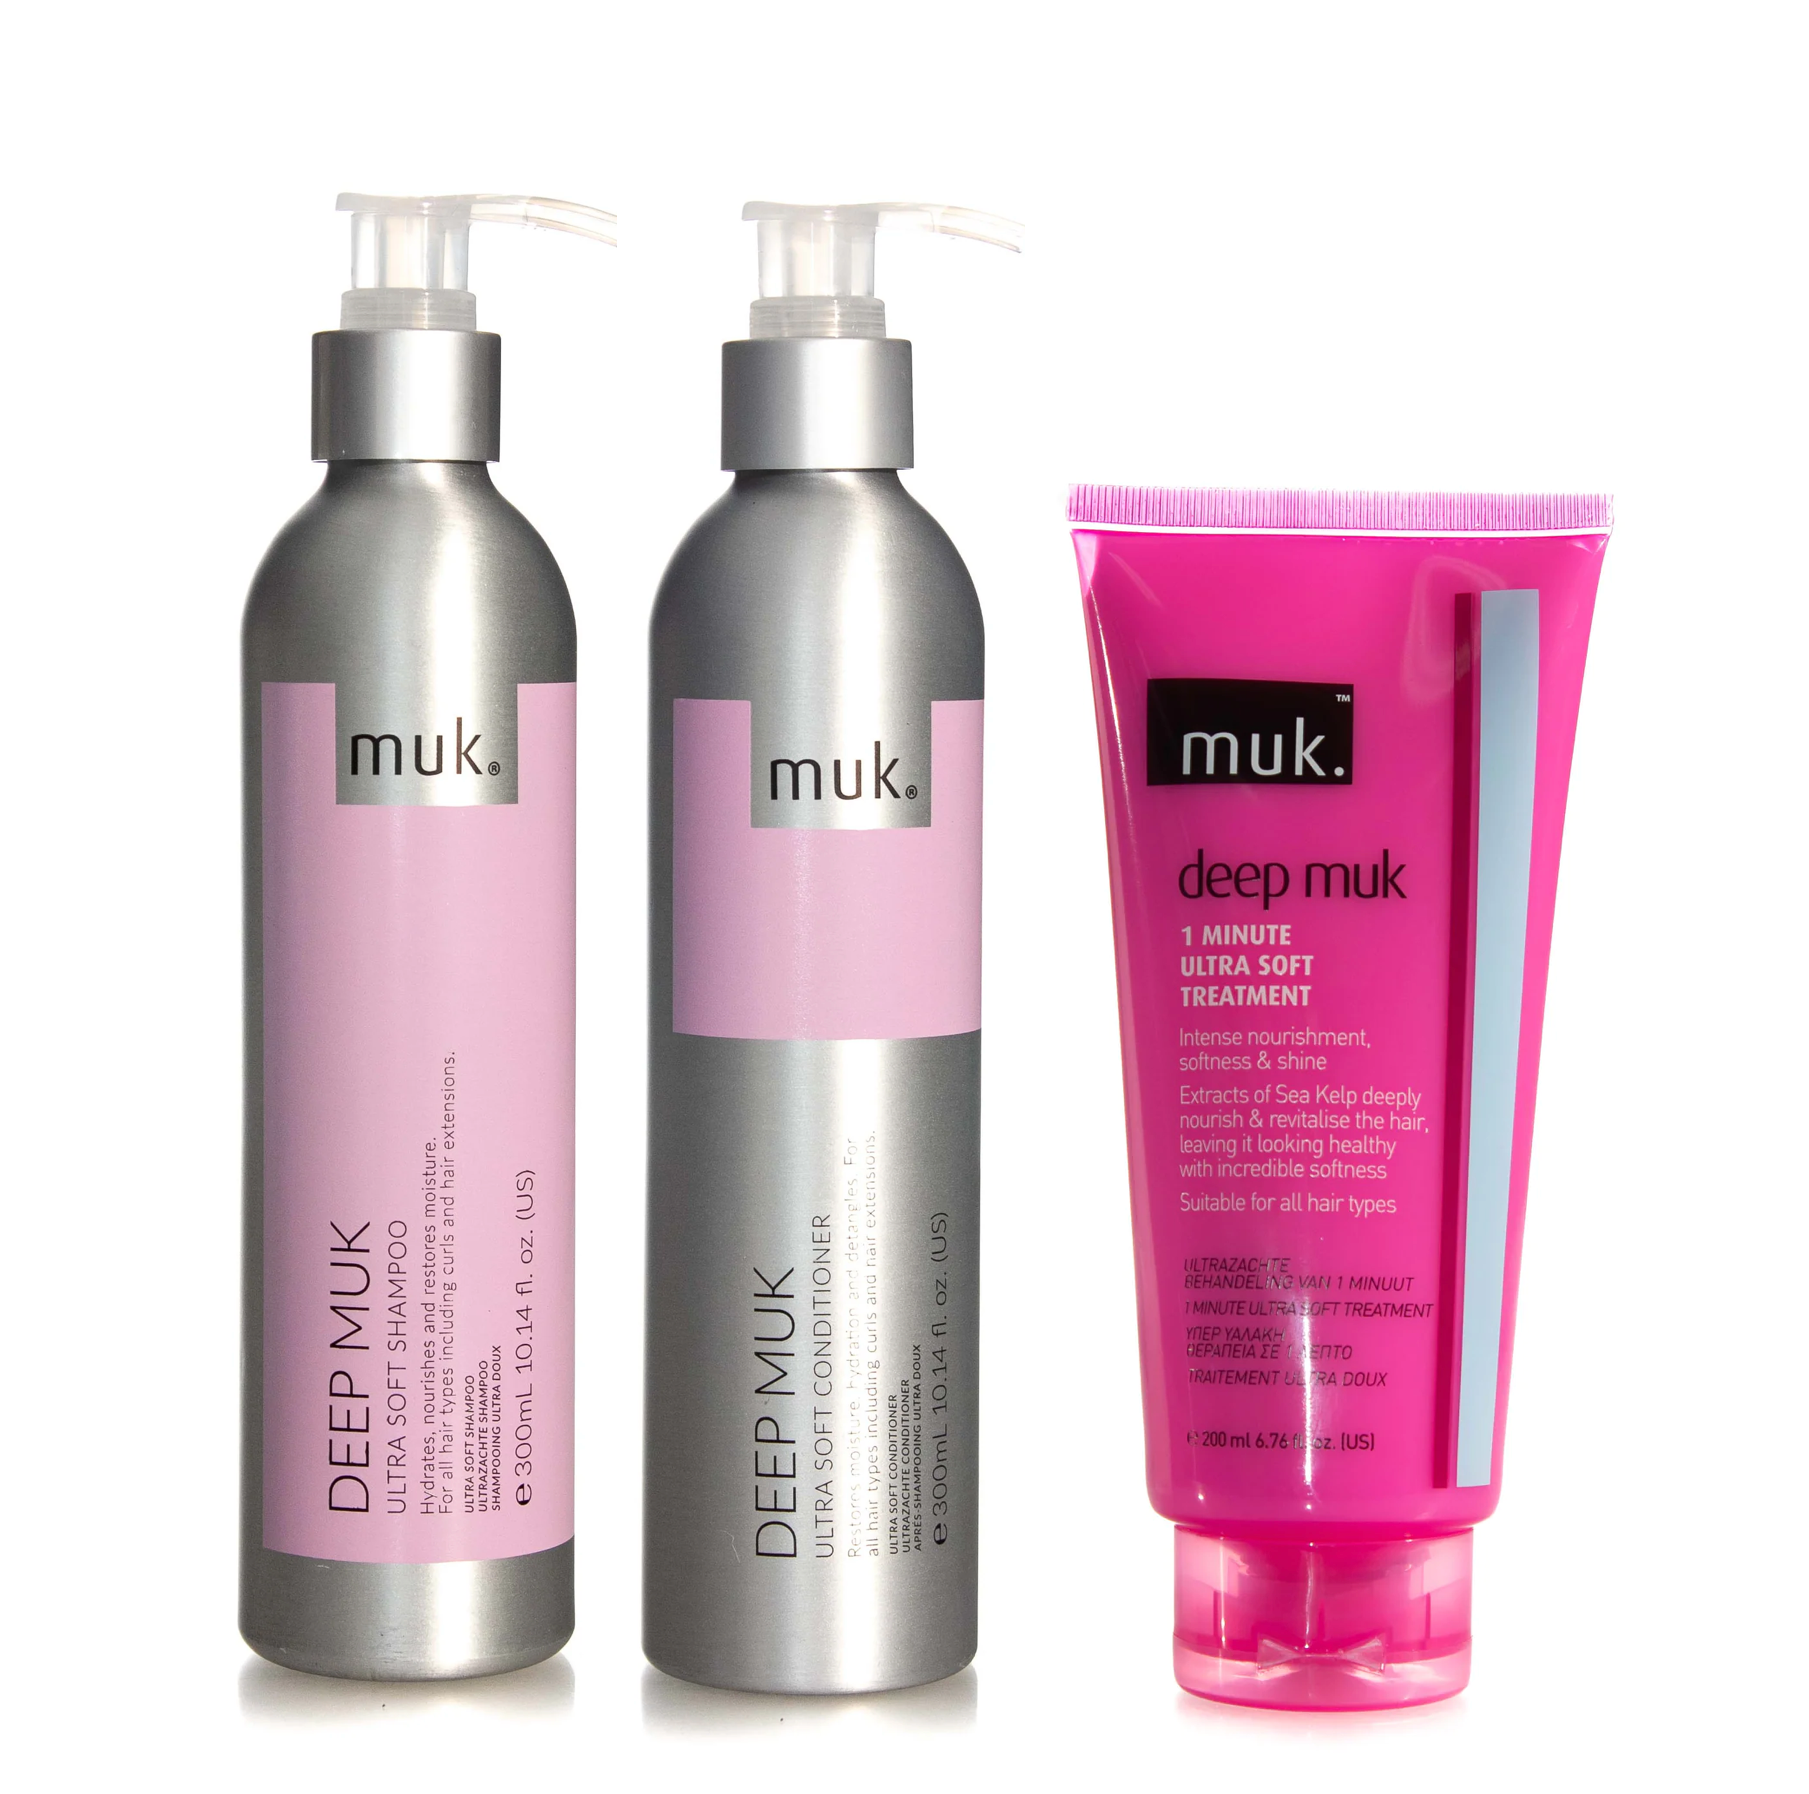 Muk Deep Ultra Soft Shampoo and Conditioner 300ml + 1 Minute Treatment 200ml